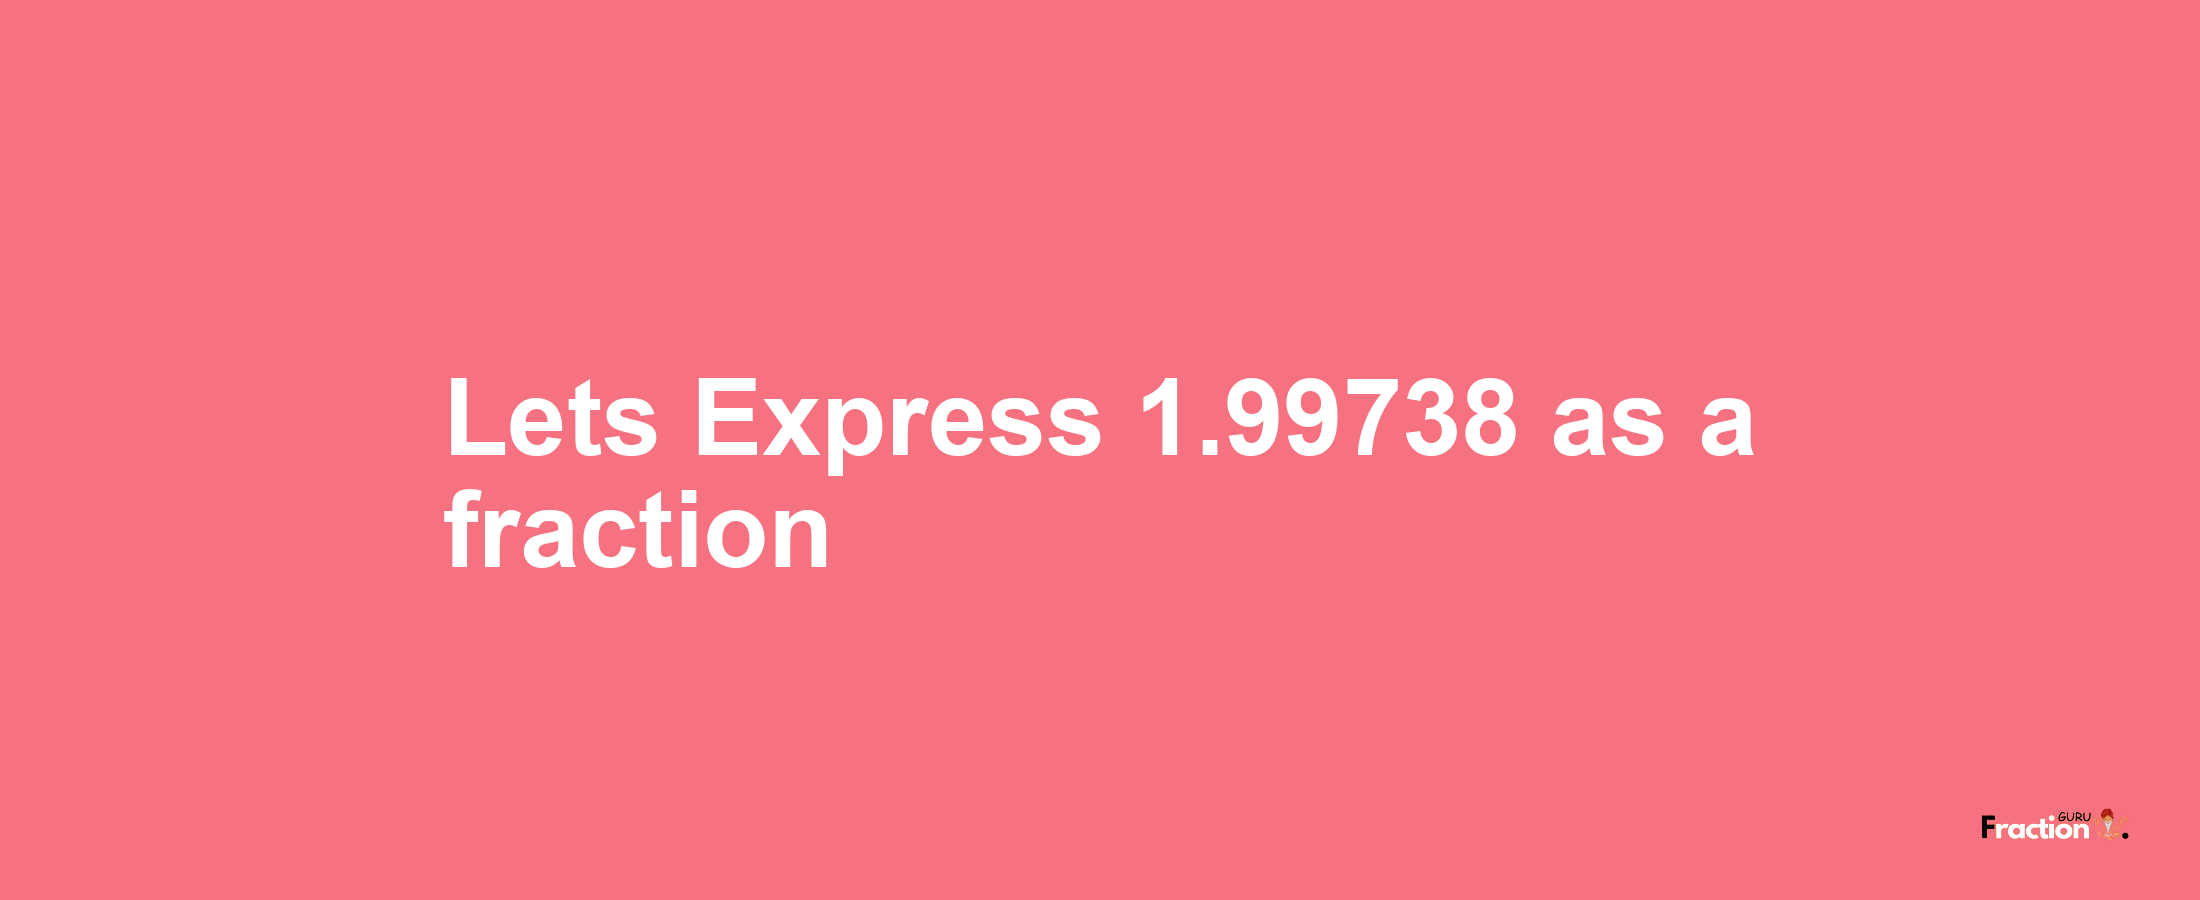 Lets Express 1.99738 as afraction